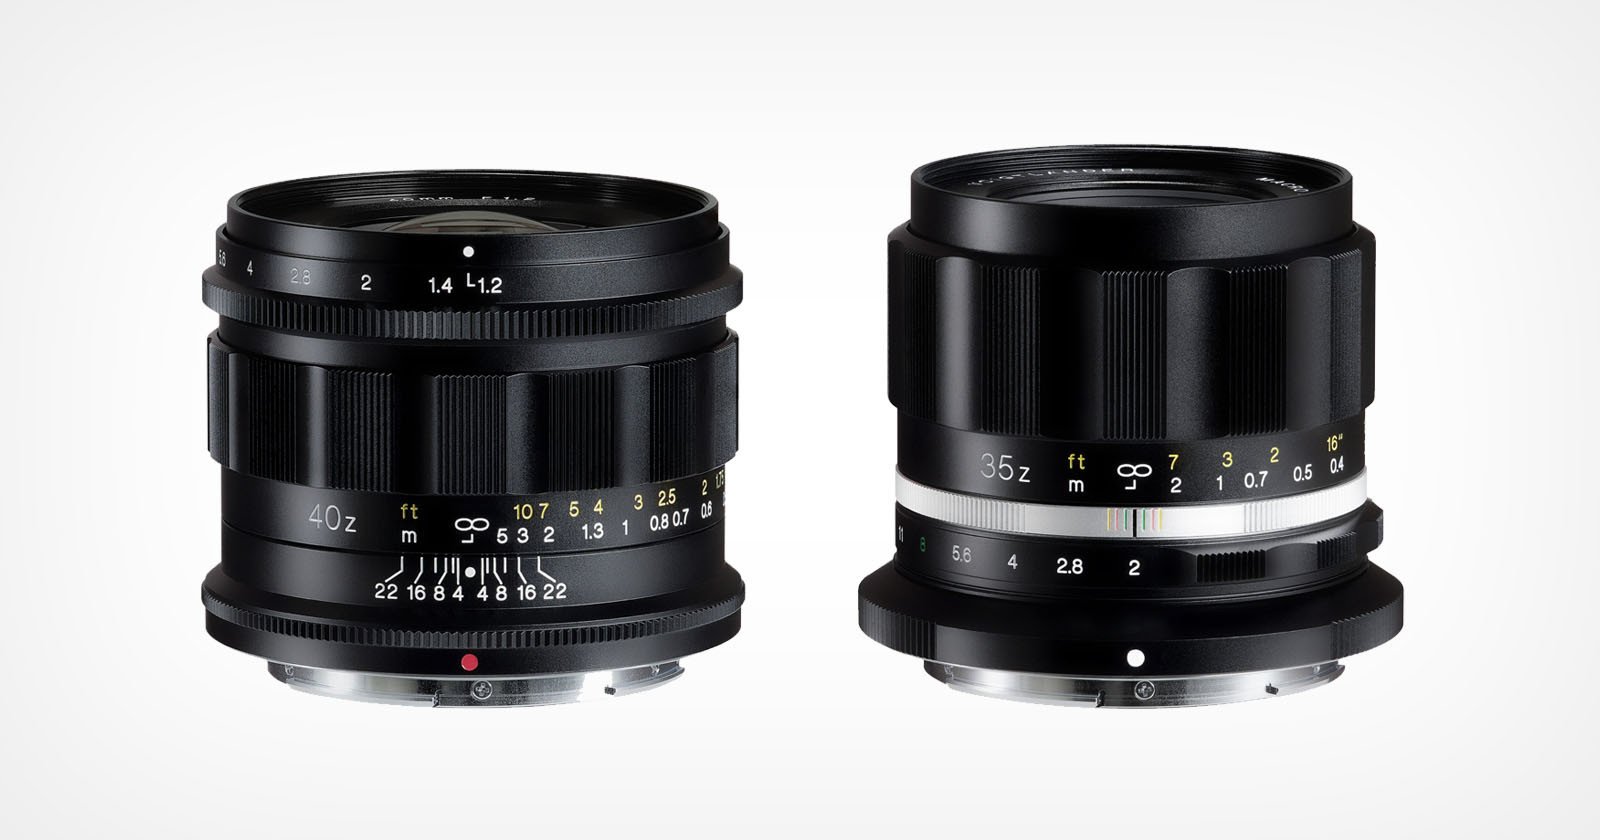 Cosina Adds Two More Z-Mount Primes: 40mm f/1.2 and 35mm f/2